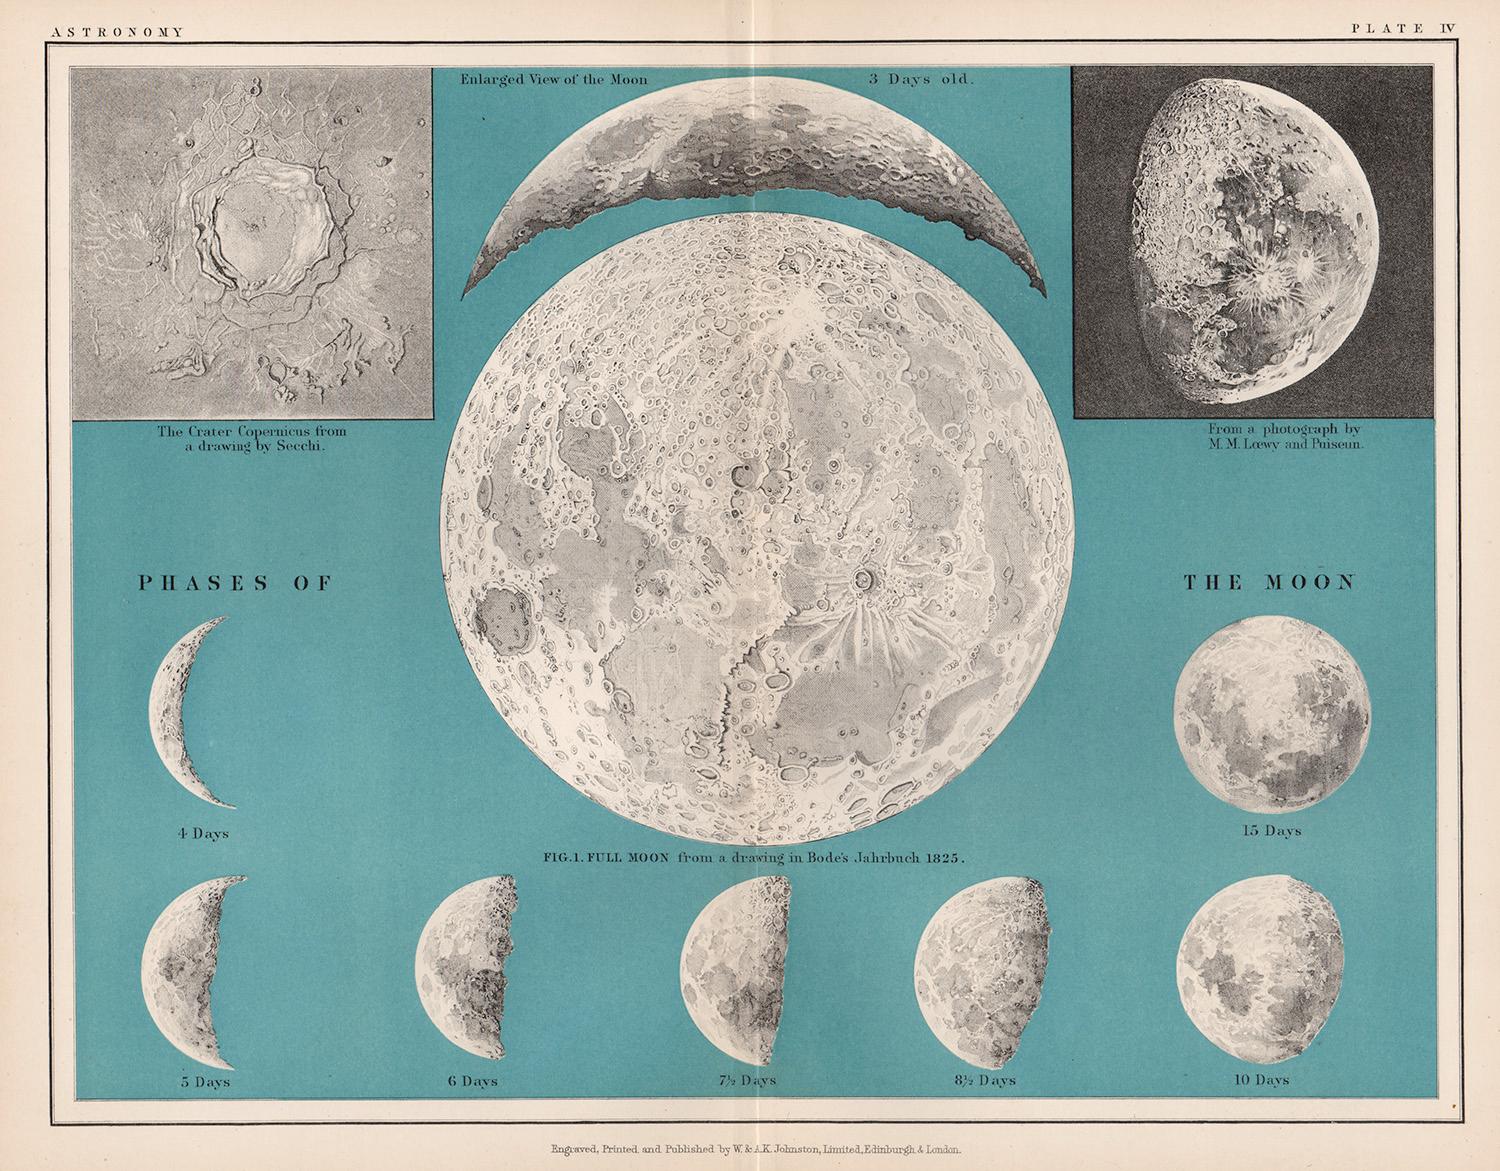 Alexander Keith Johnston Abstract Print - Phases of the Moon, antique astronomy lunar diagram print